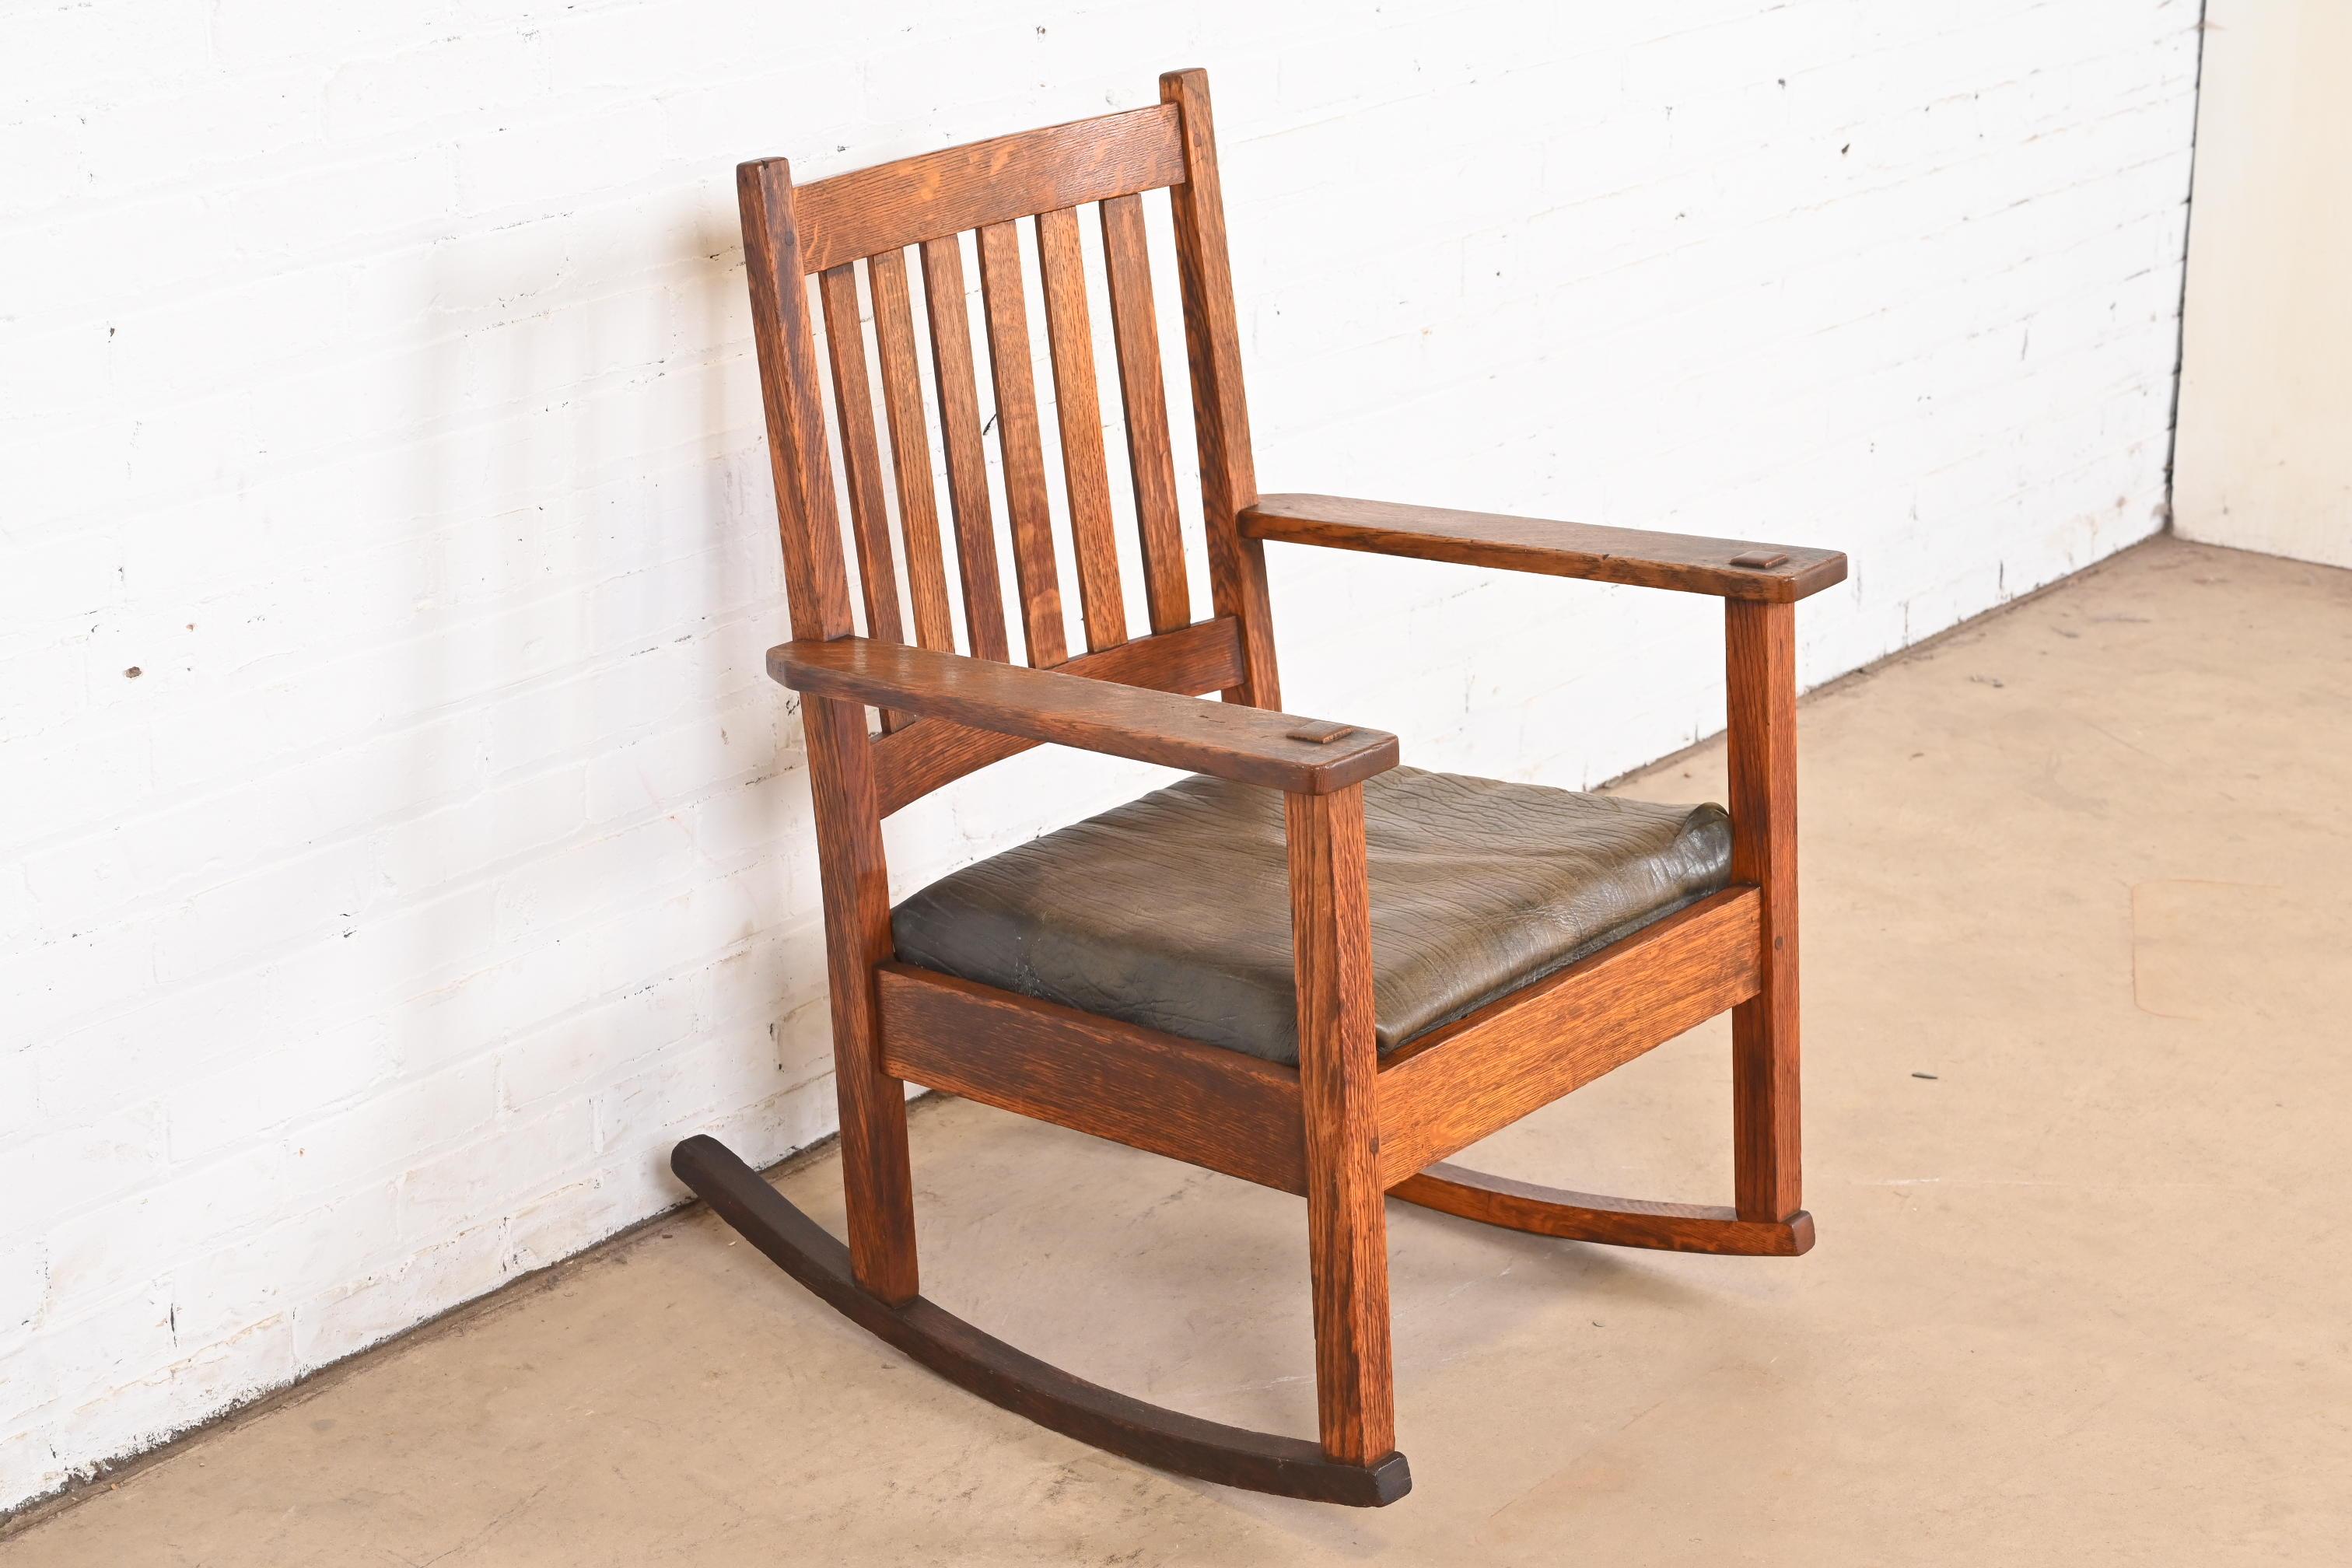 Stickley Brothers Antique Mission Oak Arts & Crafts Rocking Chair, Circa 1900 In Good Condition For Sale In South Bend, IN